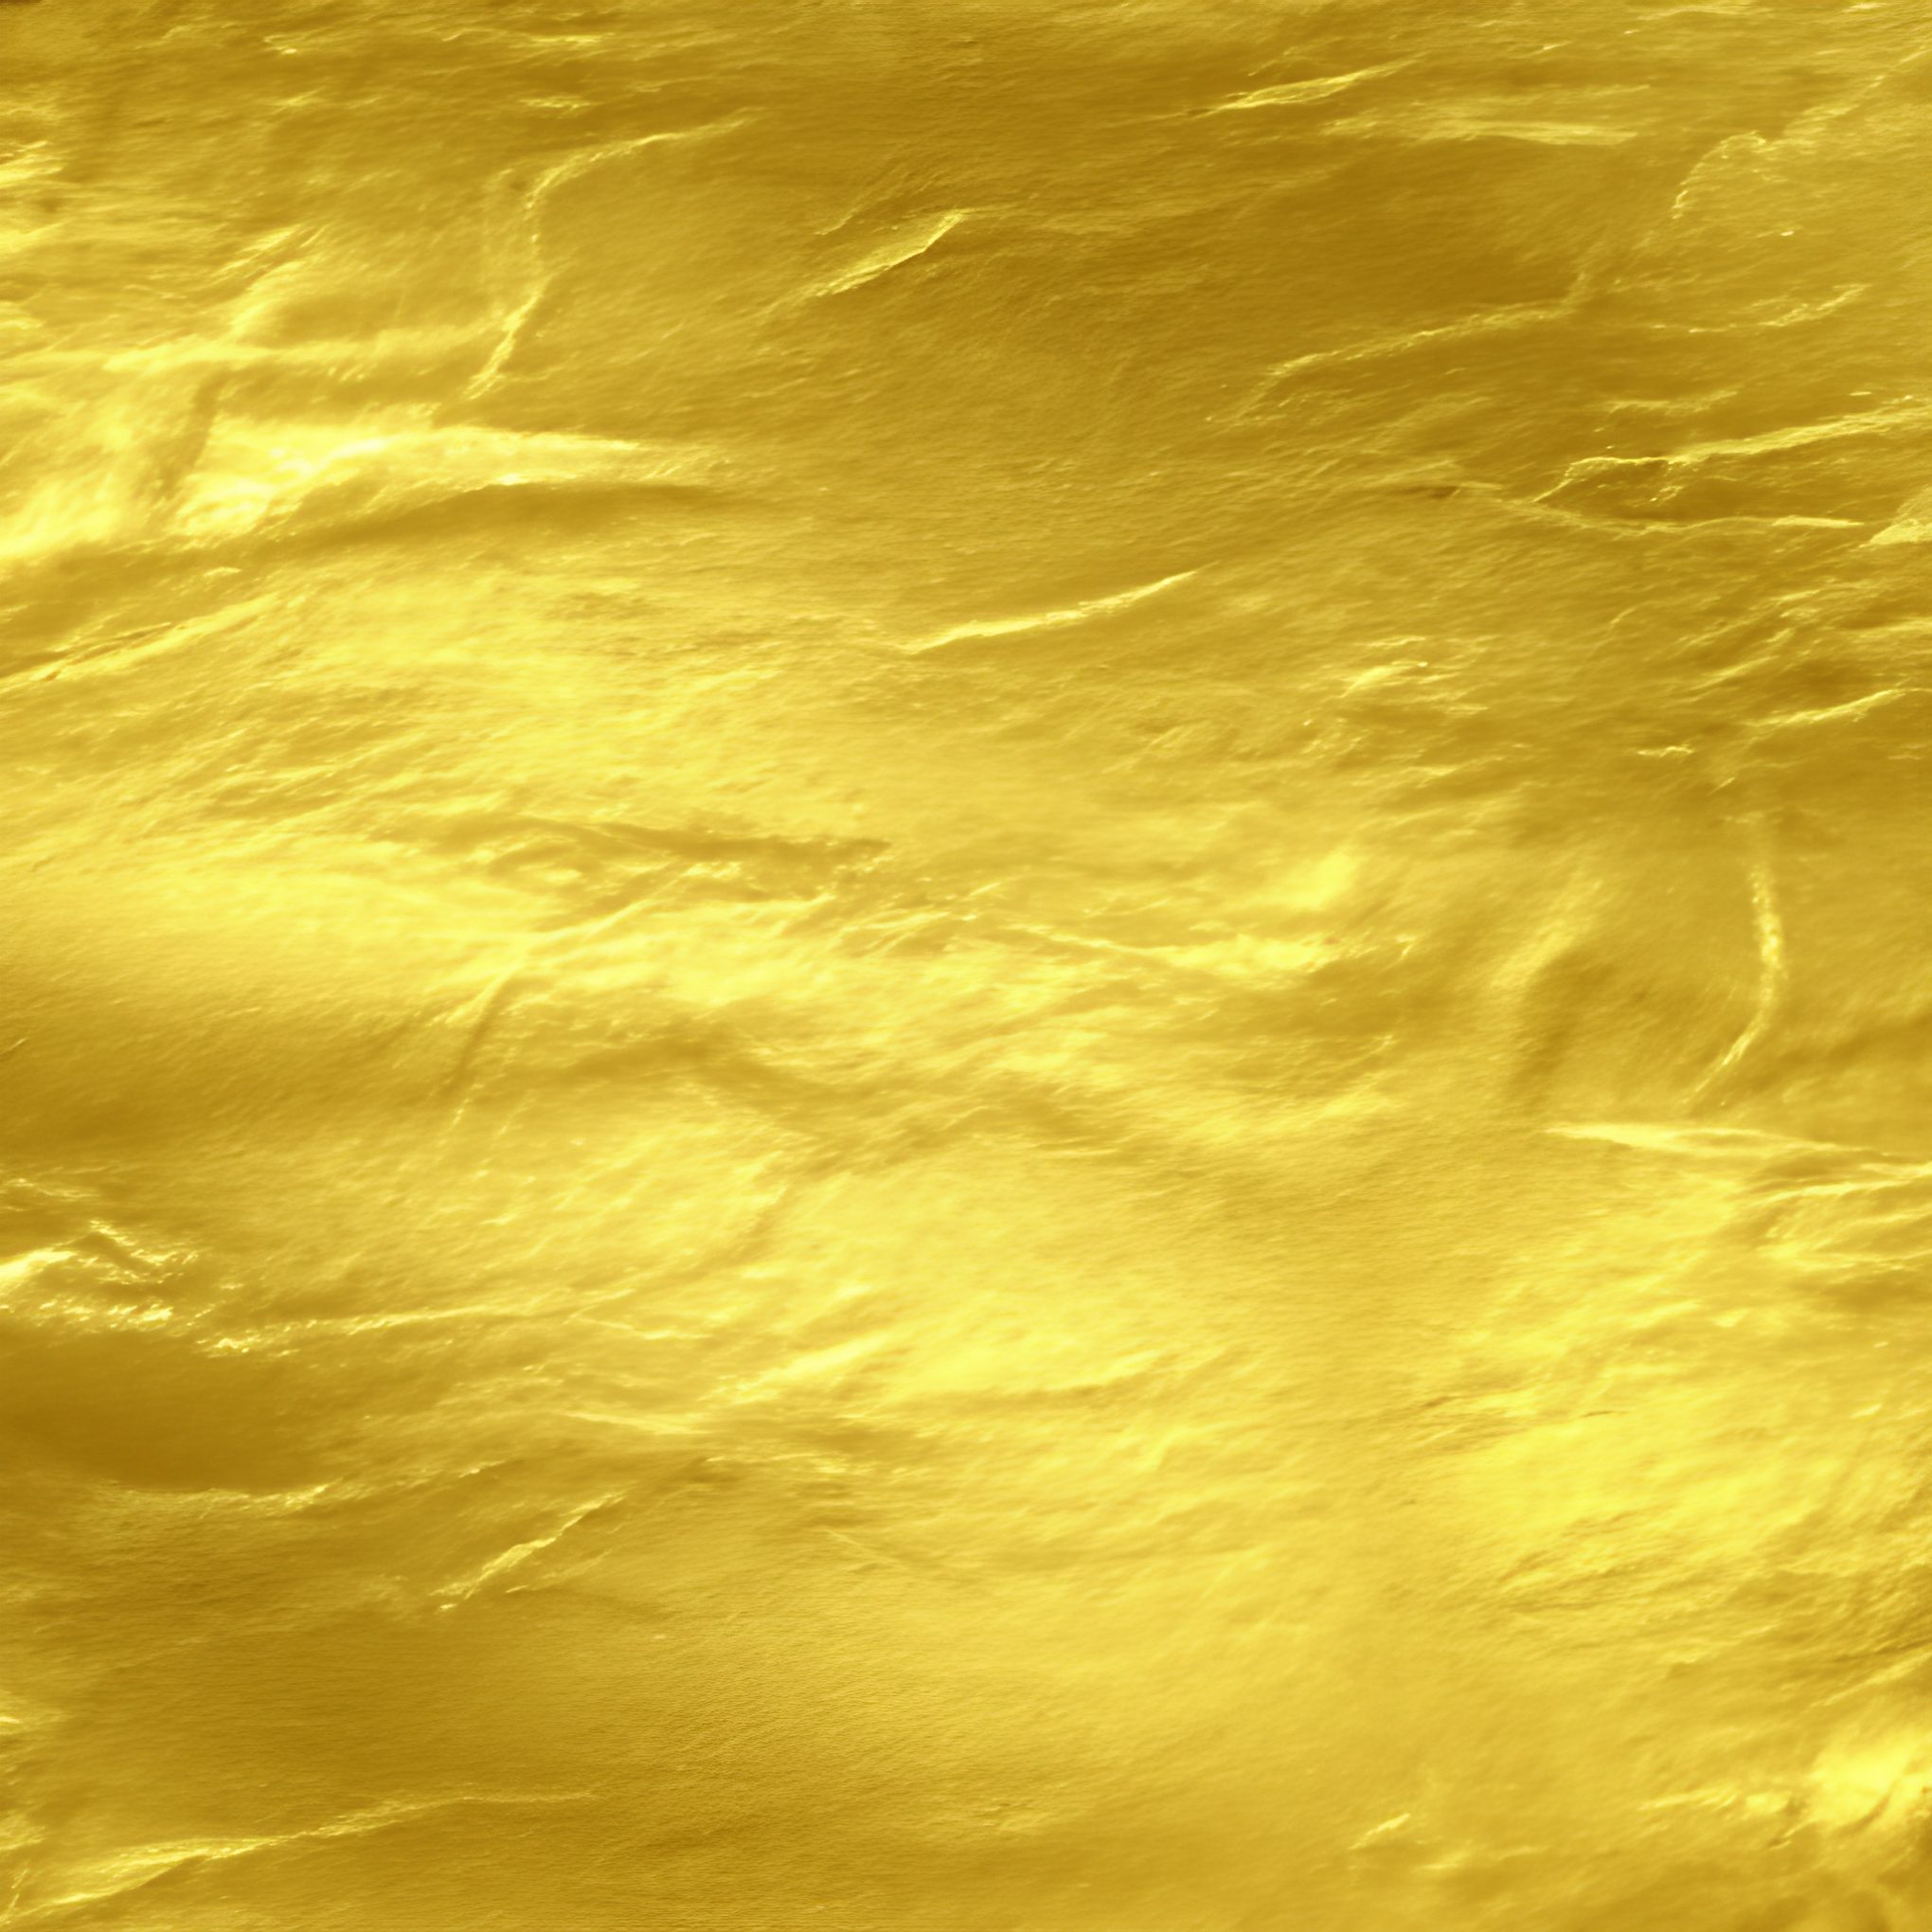 Gold Foil Background Texture Free Stock Image Download